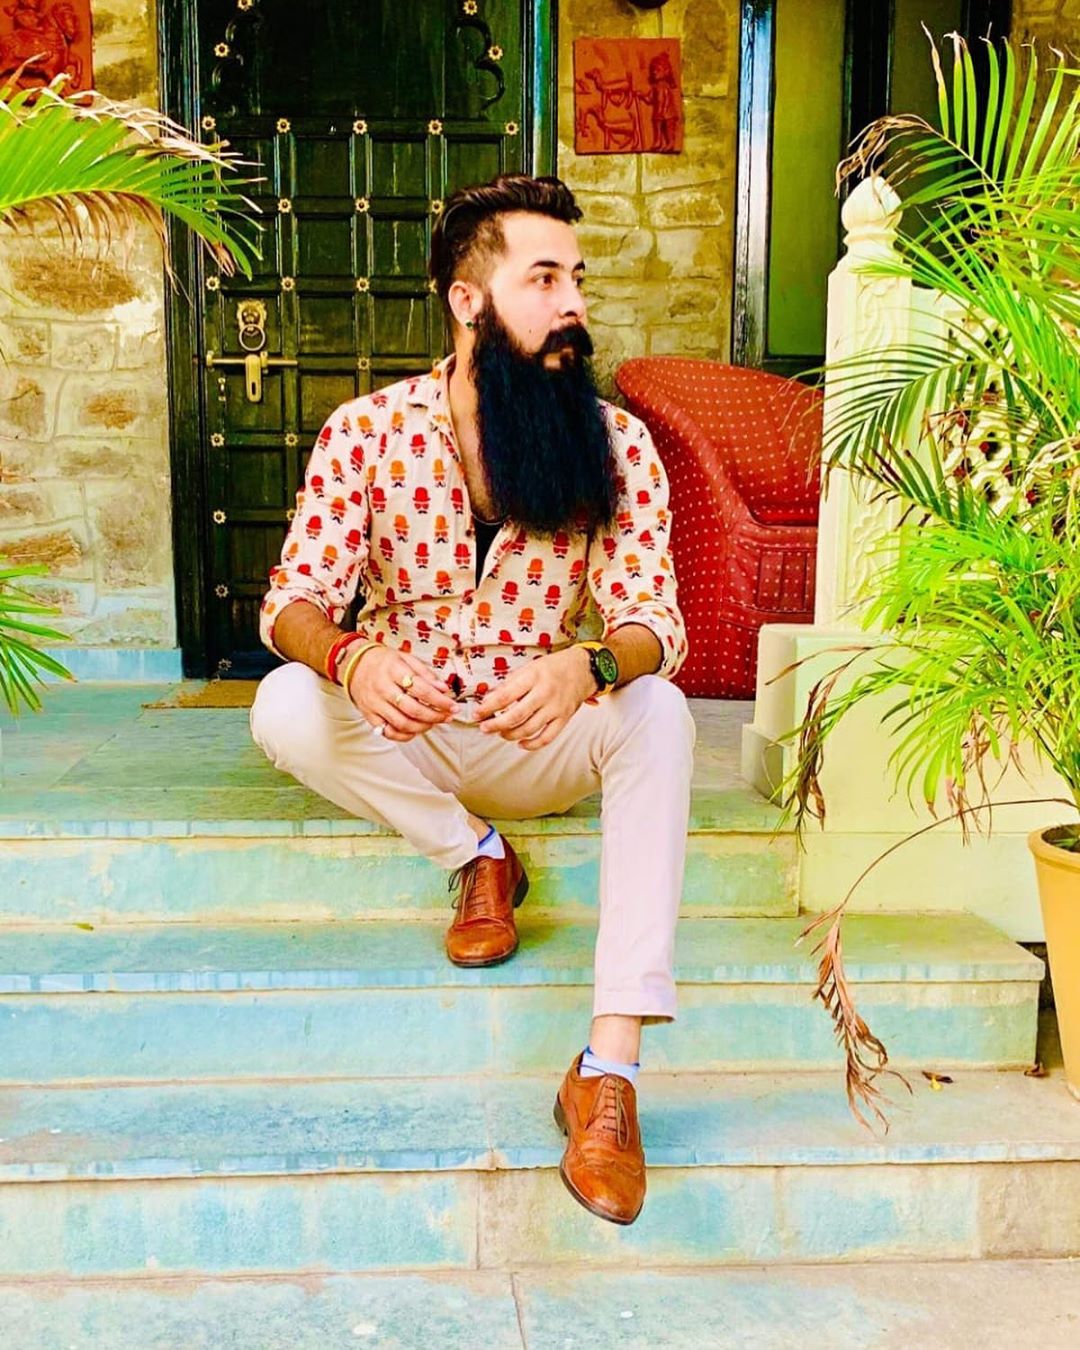 MYNTRA - Prints instantly add that extra edge to your look!
 📸 @_smokenbeard_
Look up similar product code:  10986908 / 7030756 /11709632
For more on-point looks, styling hacks and fashion advice, tun...